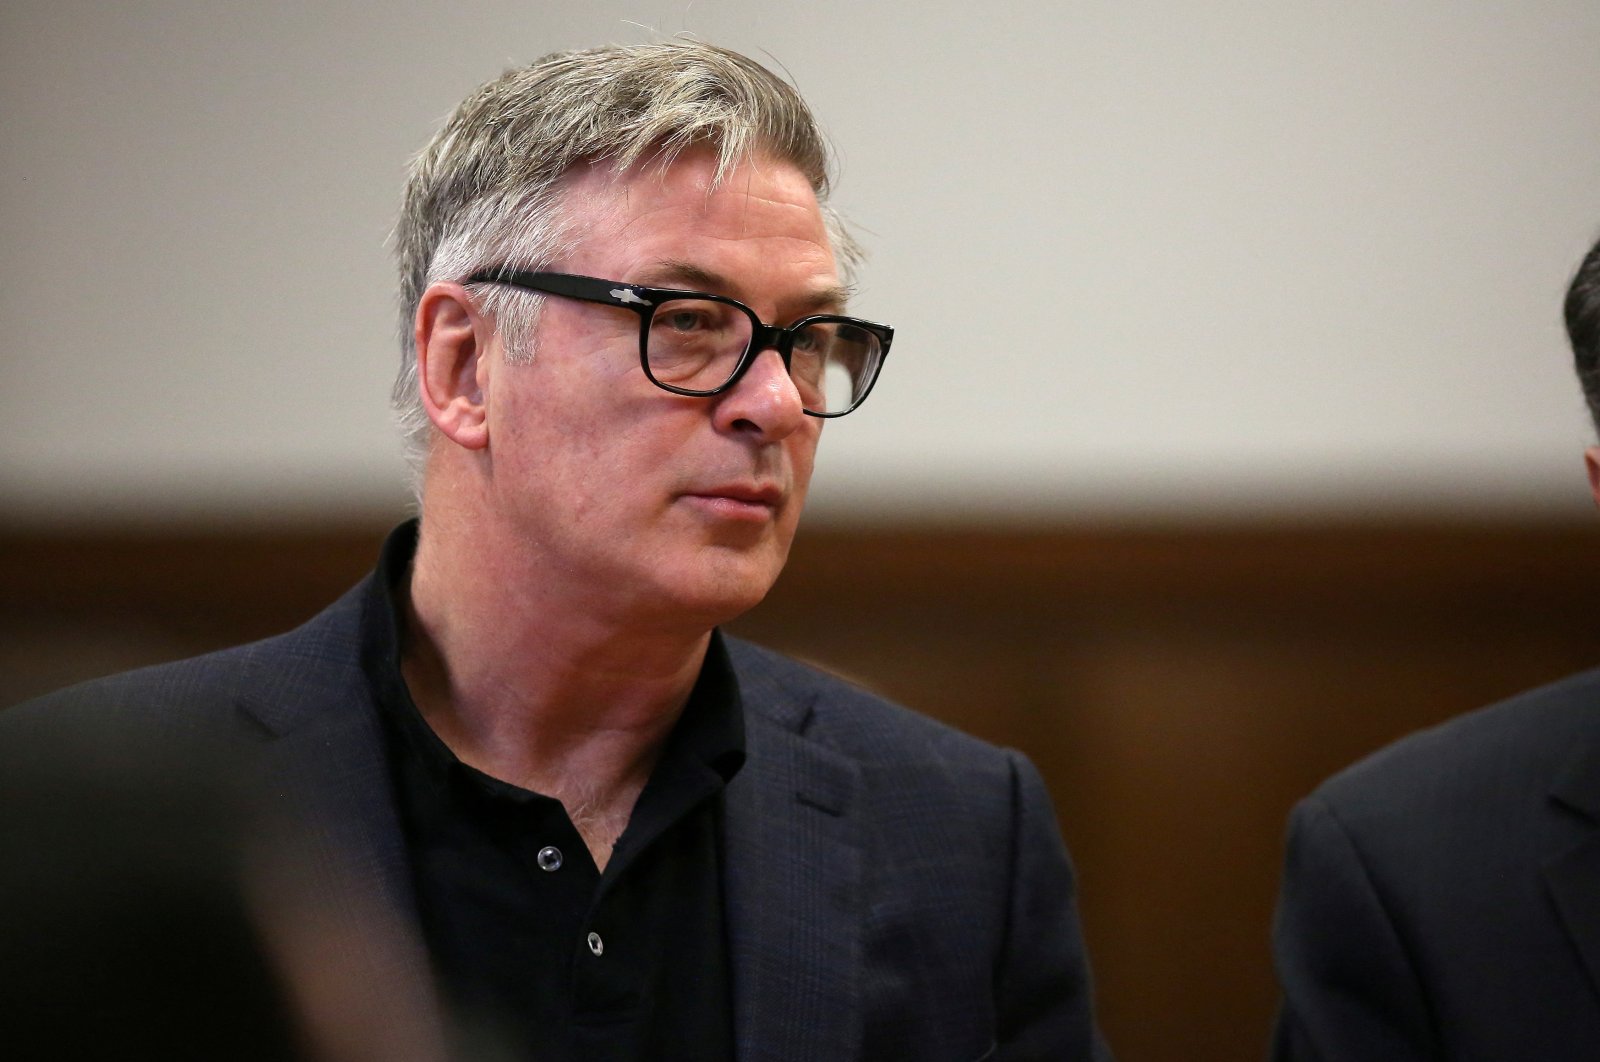 Actor Alec Baldwin appears in court in the Manhattan borough of New York City, New York, U.S., Jan. 23, 2019. (Reuters Photo)